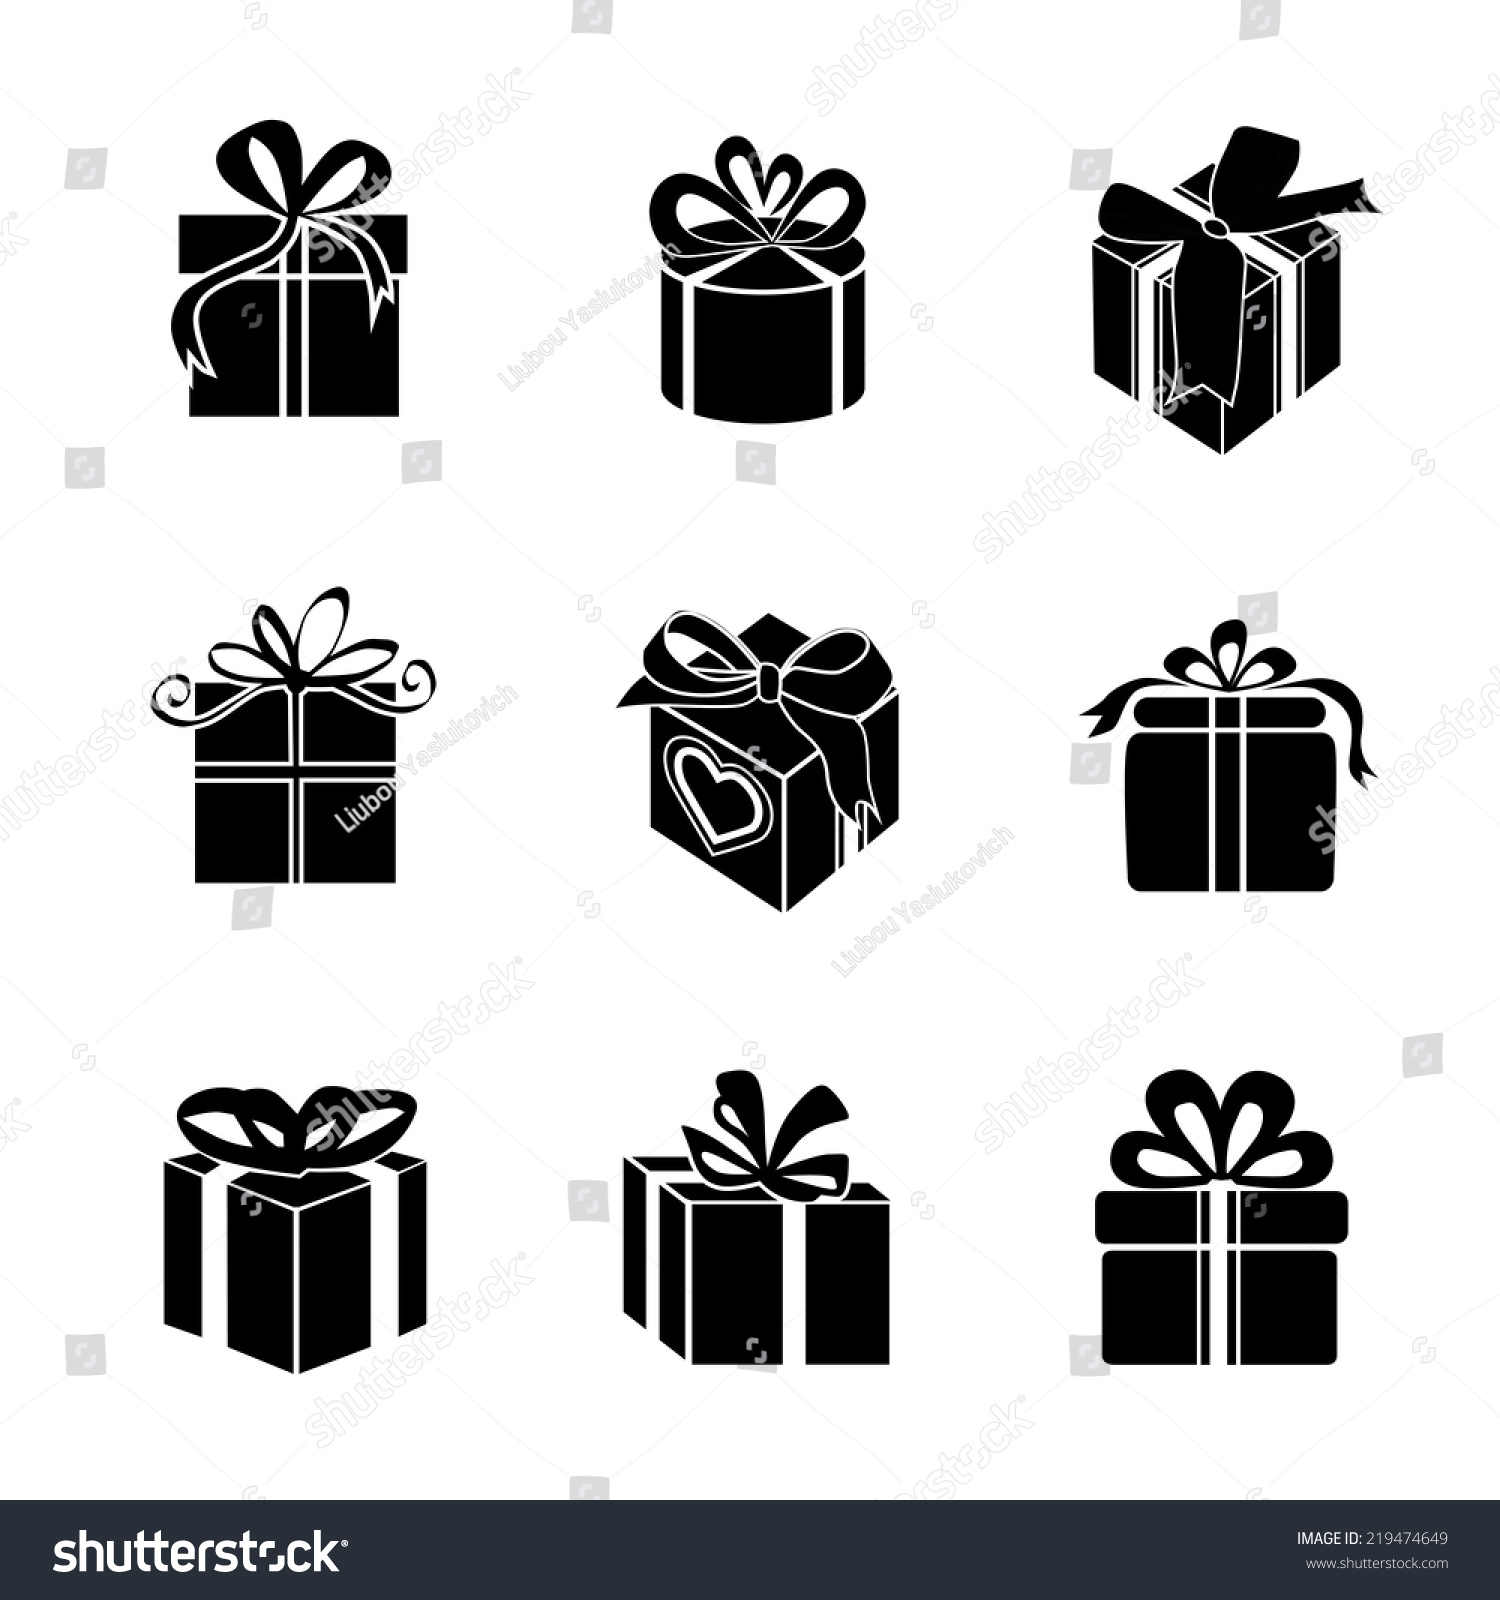 Gift Box Vector Icon Silhouette On Stock Vector Royalty Free 219474649